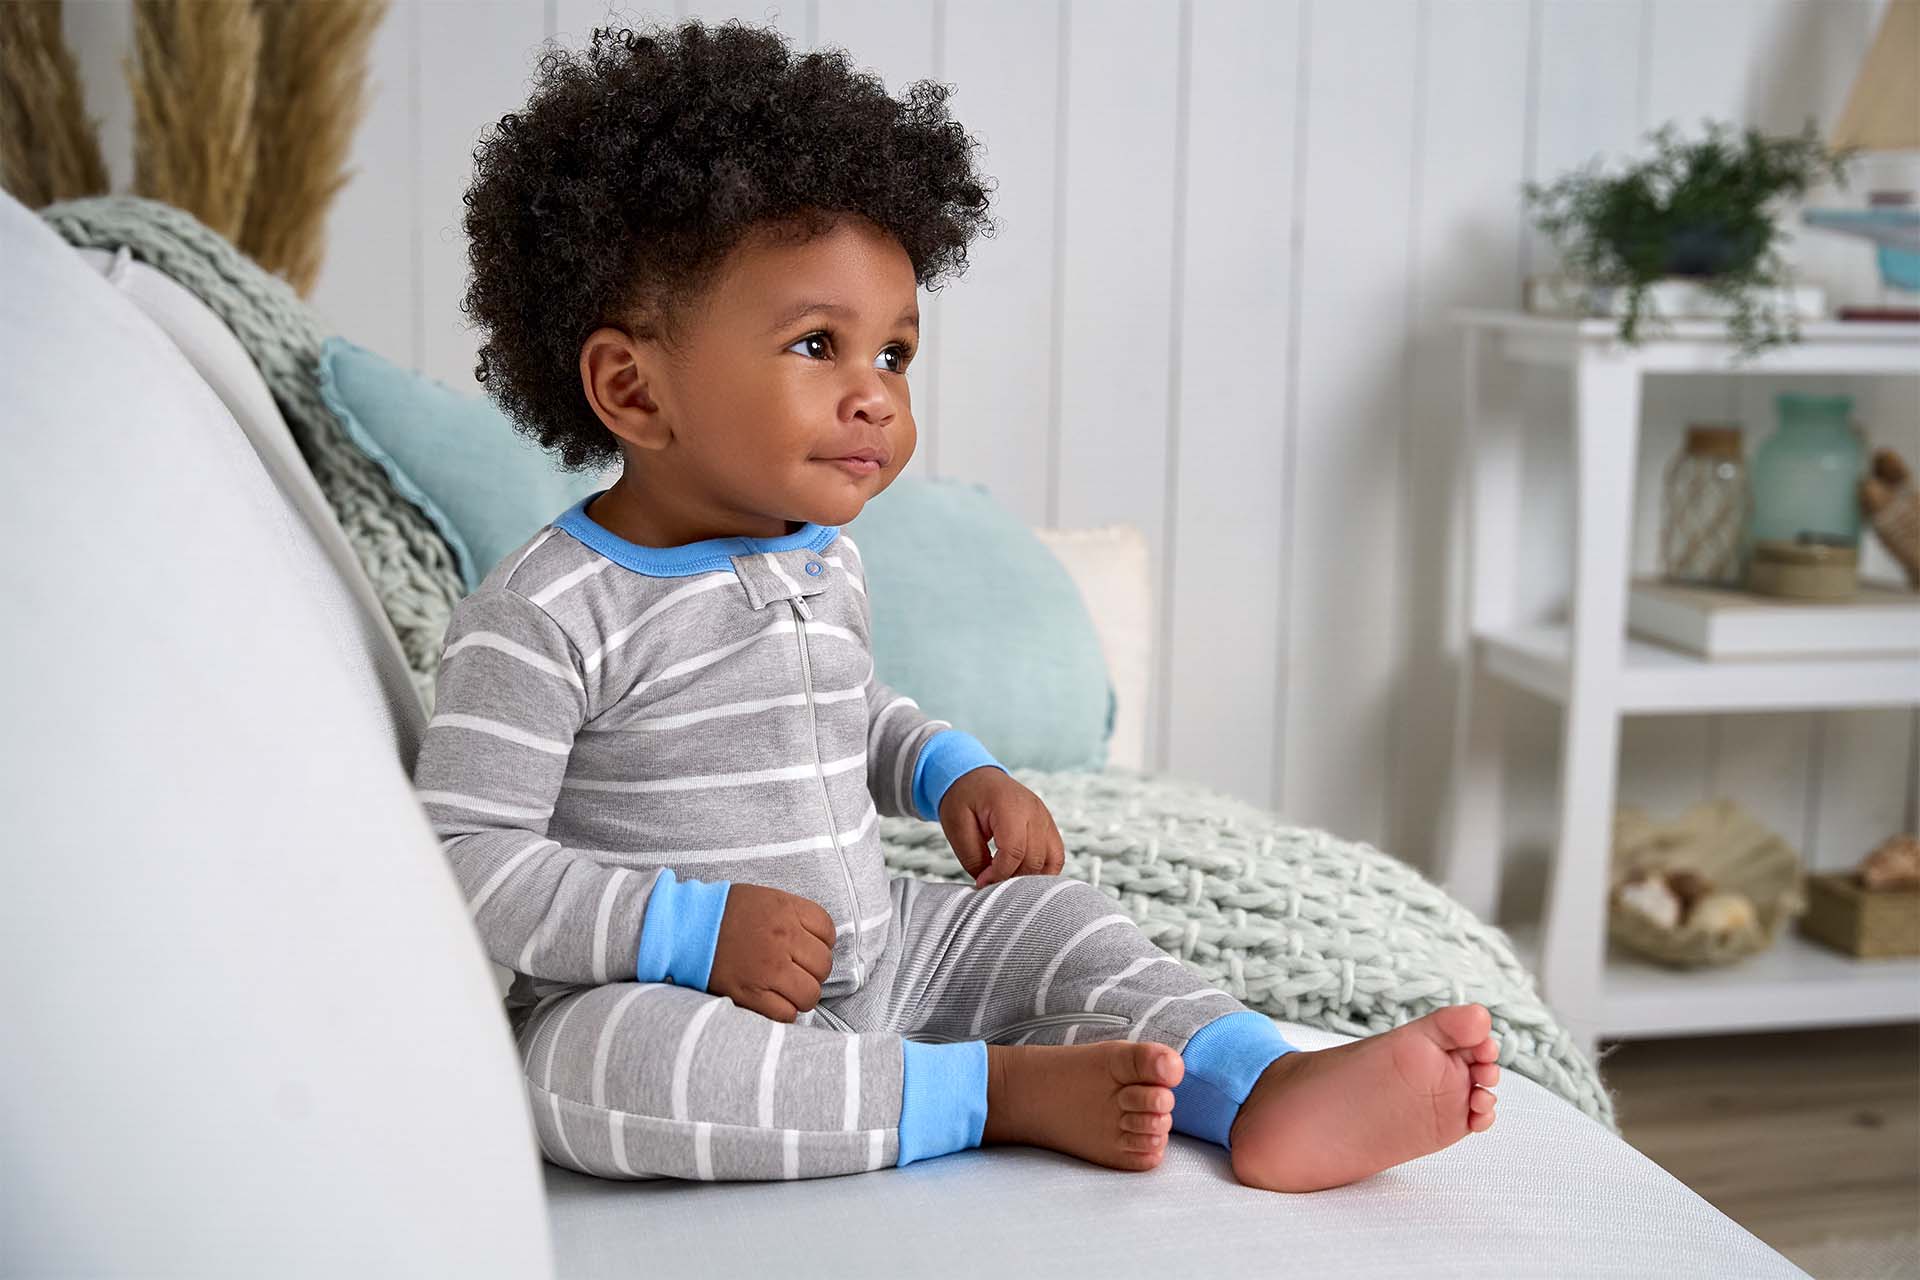 A baby with curly hair, dressed in a gray and white striped zip up pajama with blue cuffs, sits on a light-colored couch in a cozy, well-decorated room.